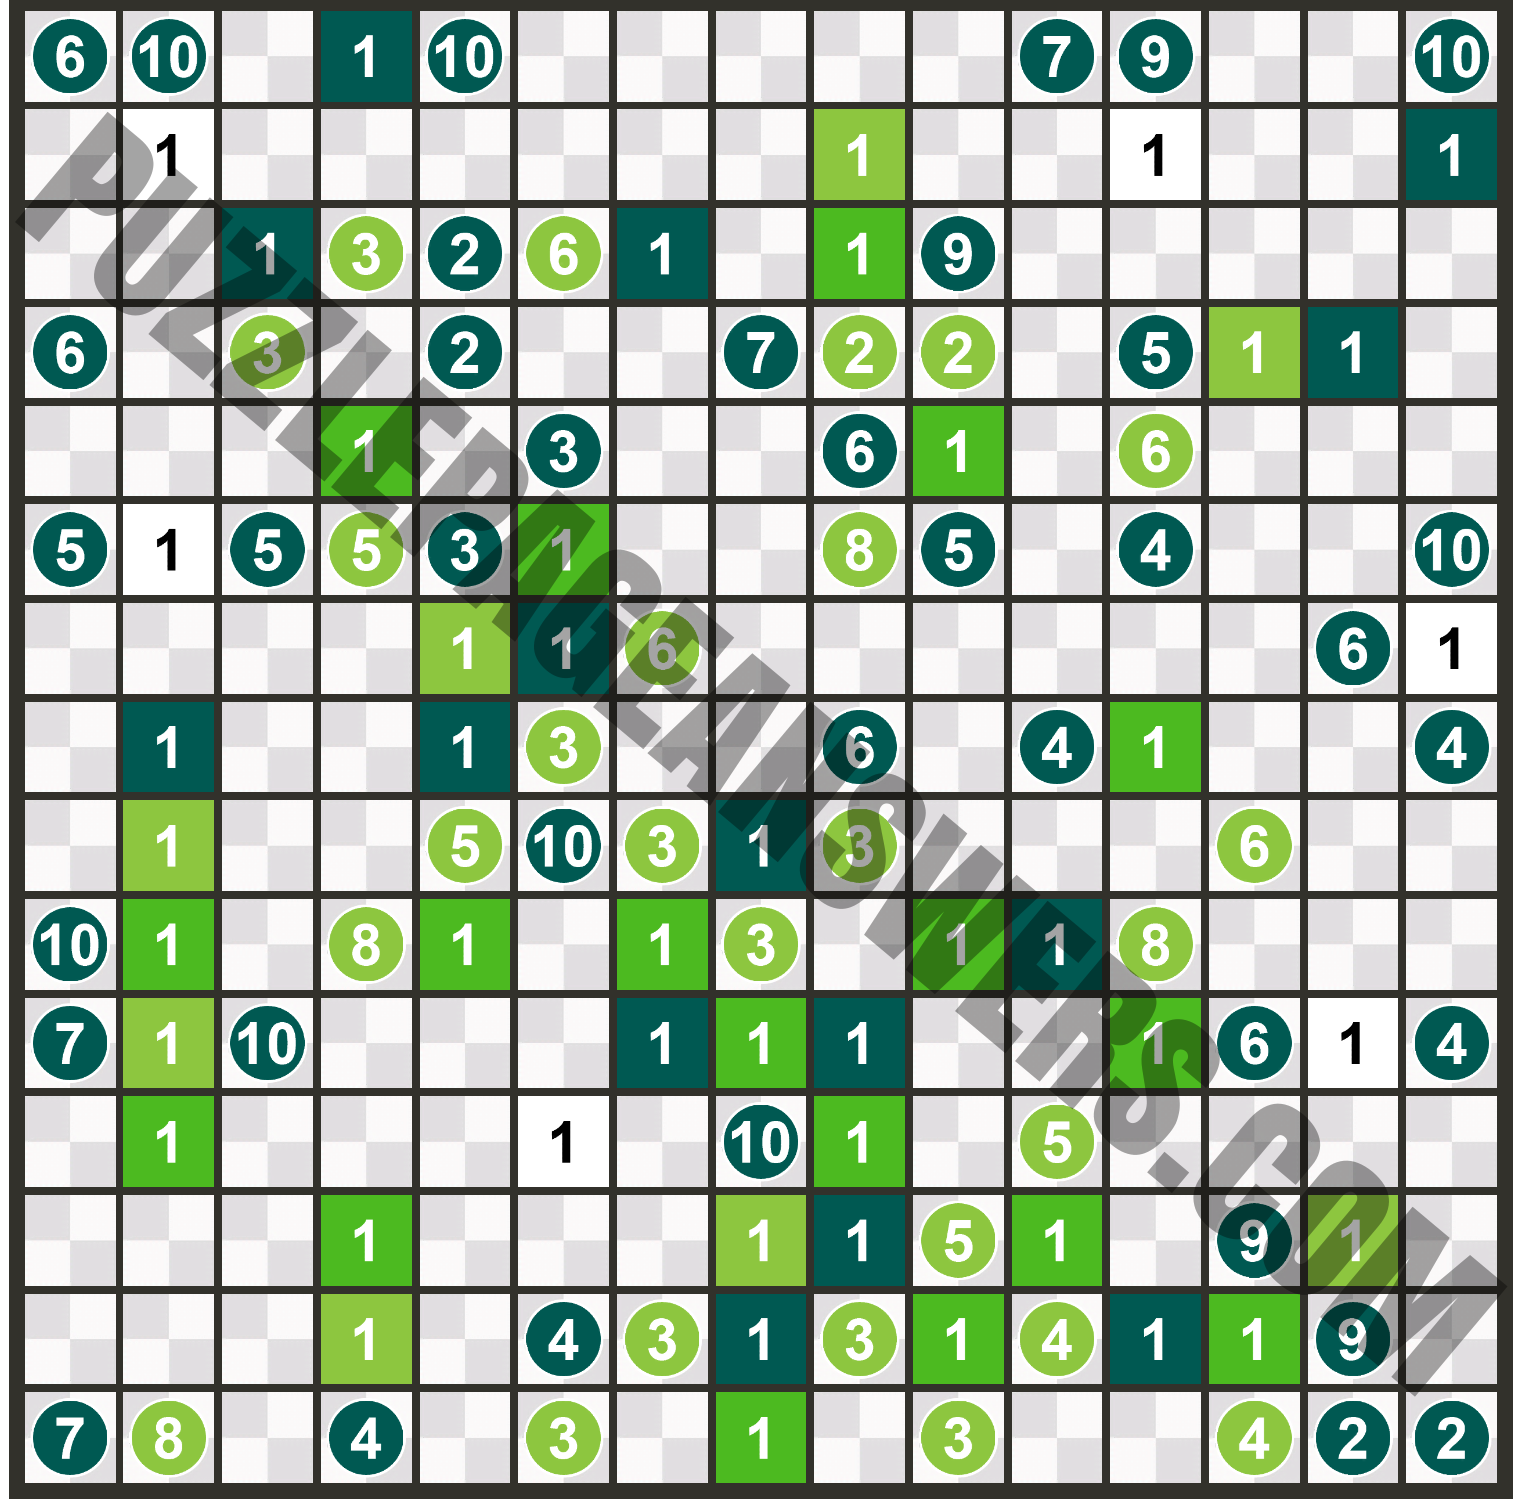 Puzzle Page Picture Path May 13 2020 PuzzlePageAnswers com